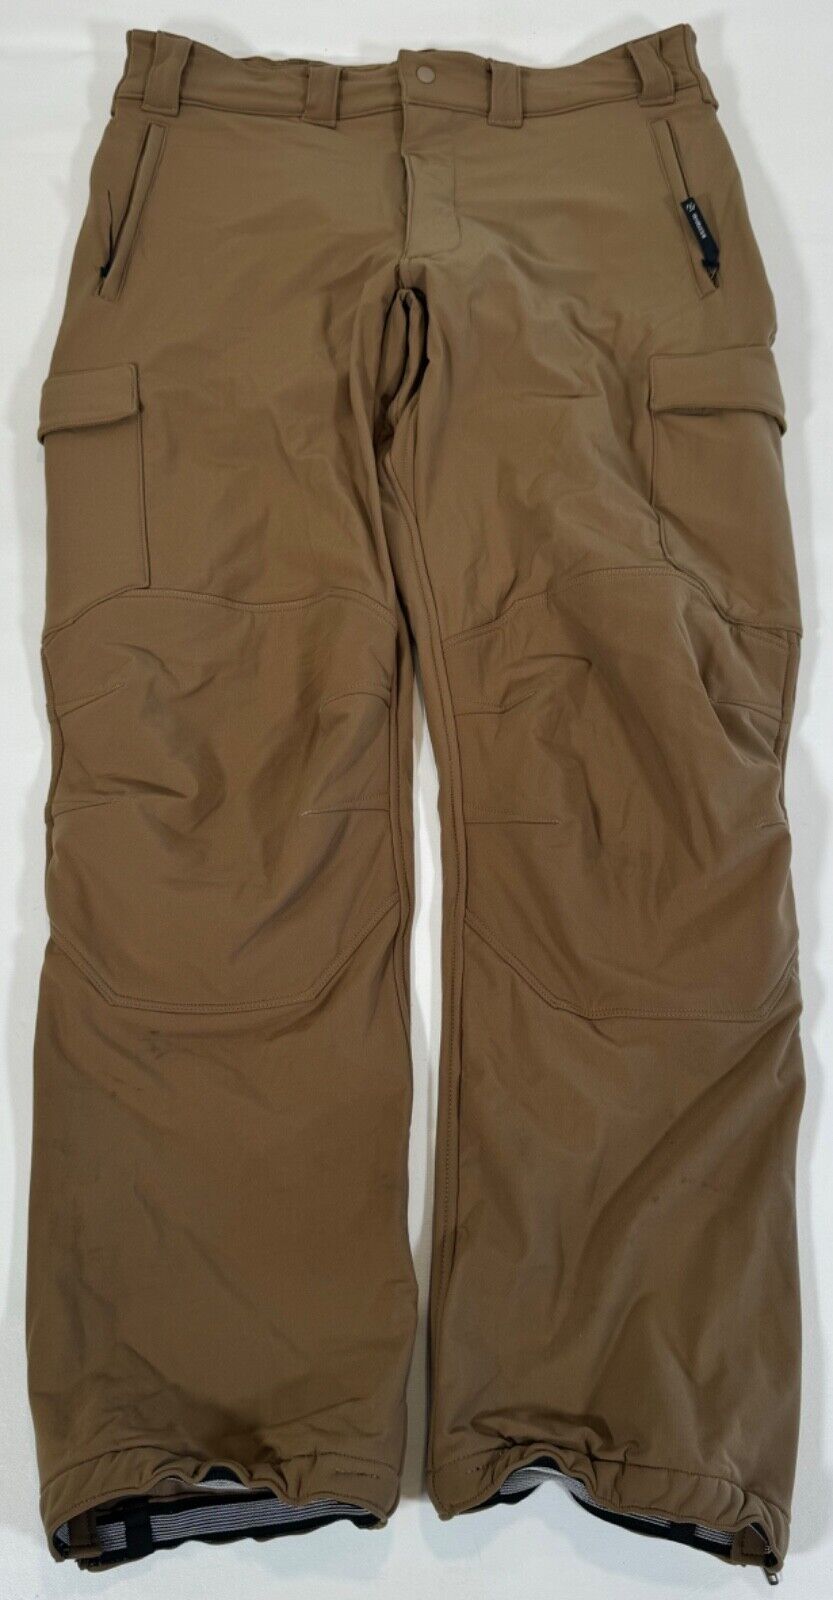 Beyond Clothing Cold Fusion L5 Soft Shell Pants Coyote Brown Medium